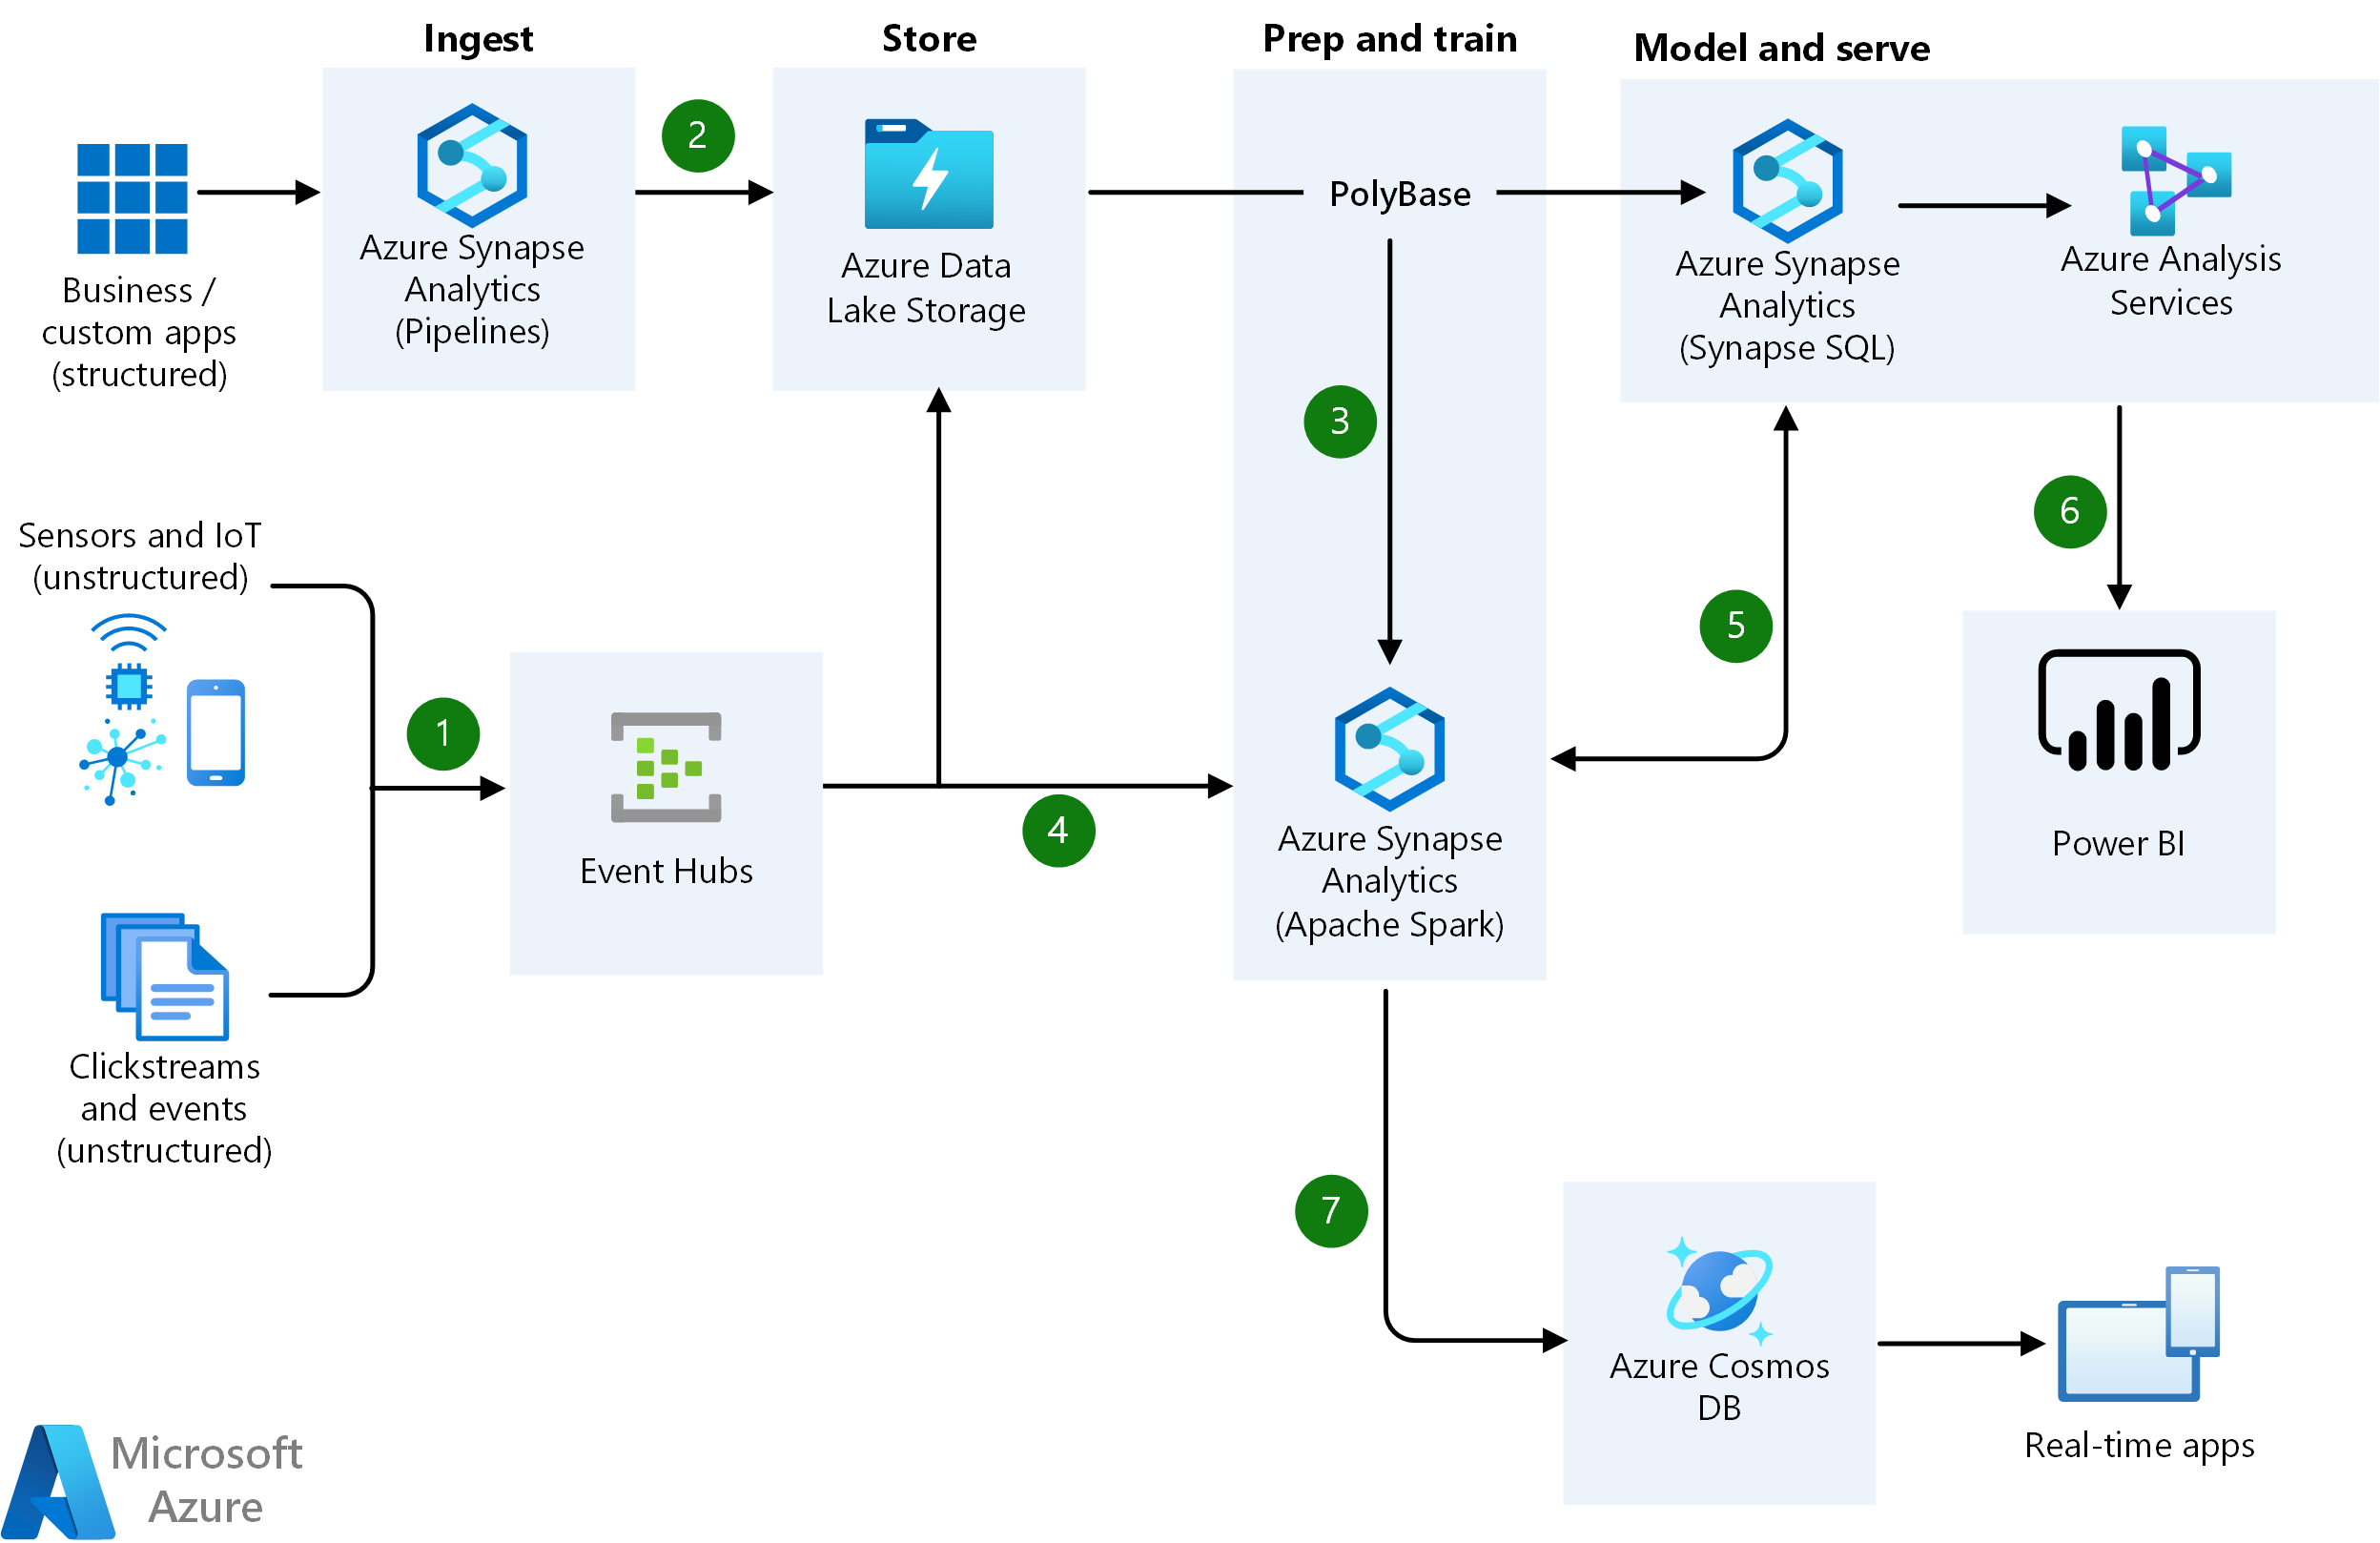 Diagram of a real-time analytics solution on big data architecture using Azure Synapse Analytics with Azure Data Lake Storage Gen2, Event Hub, Azure Analysis Services, Azure Cosmos DB, and Power BI.